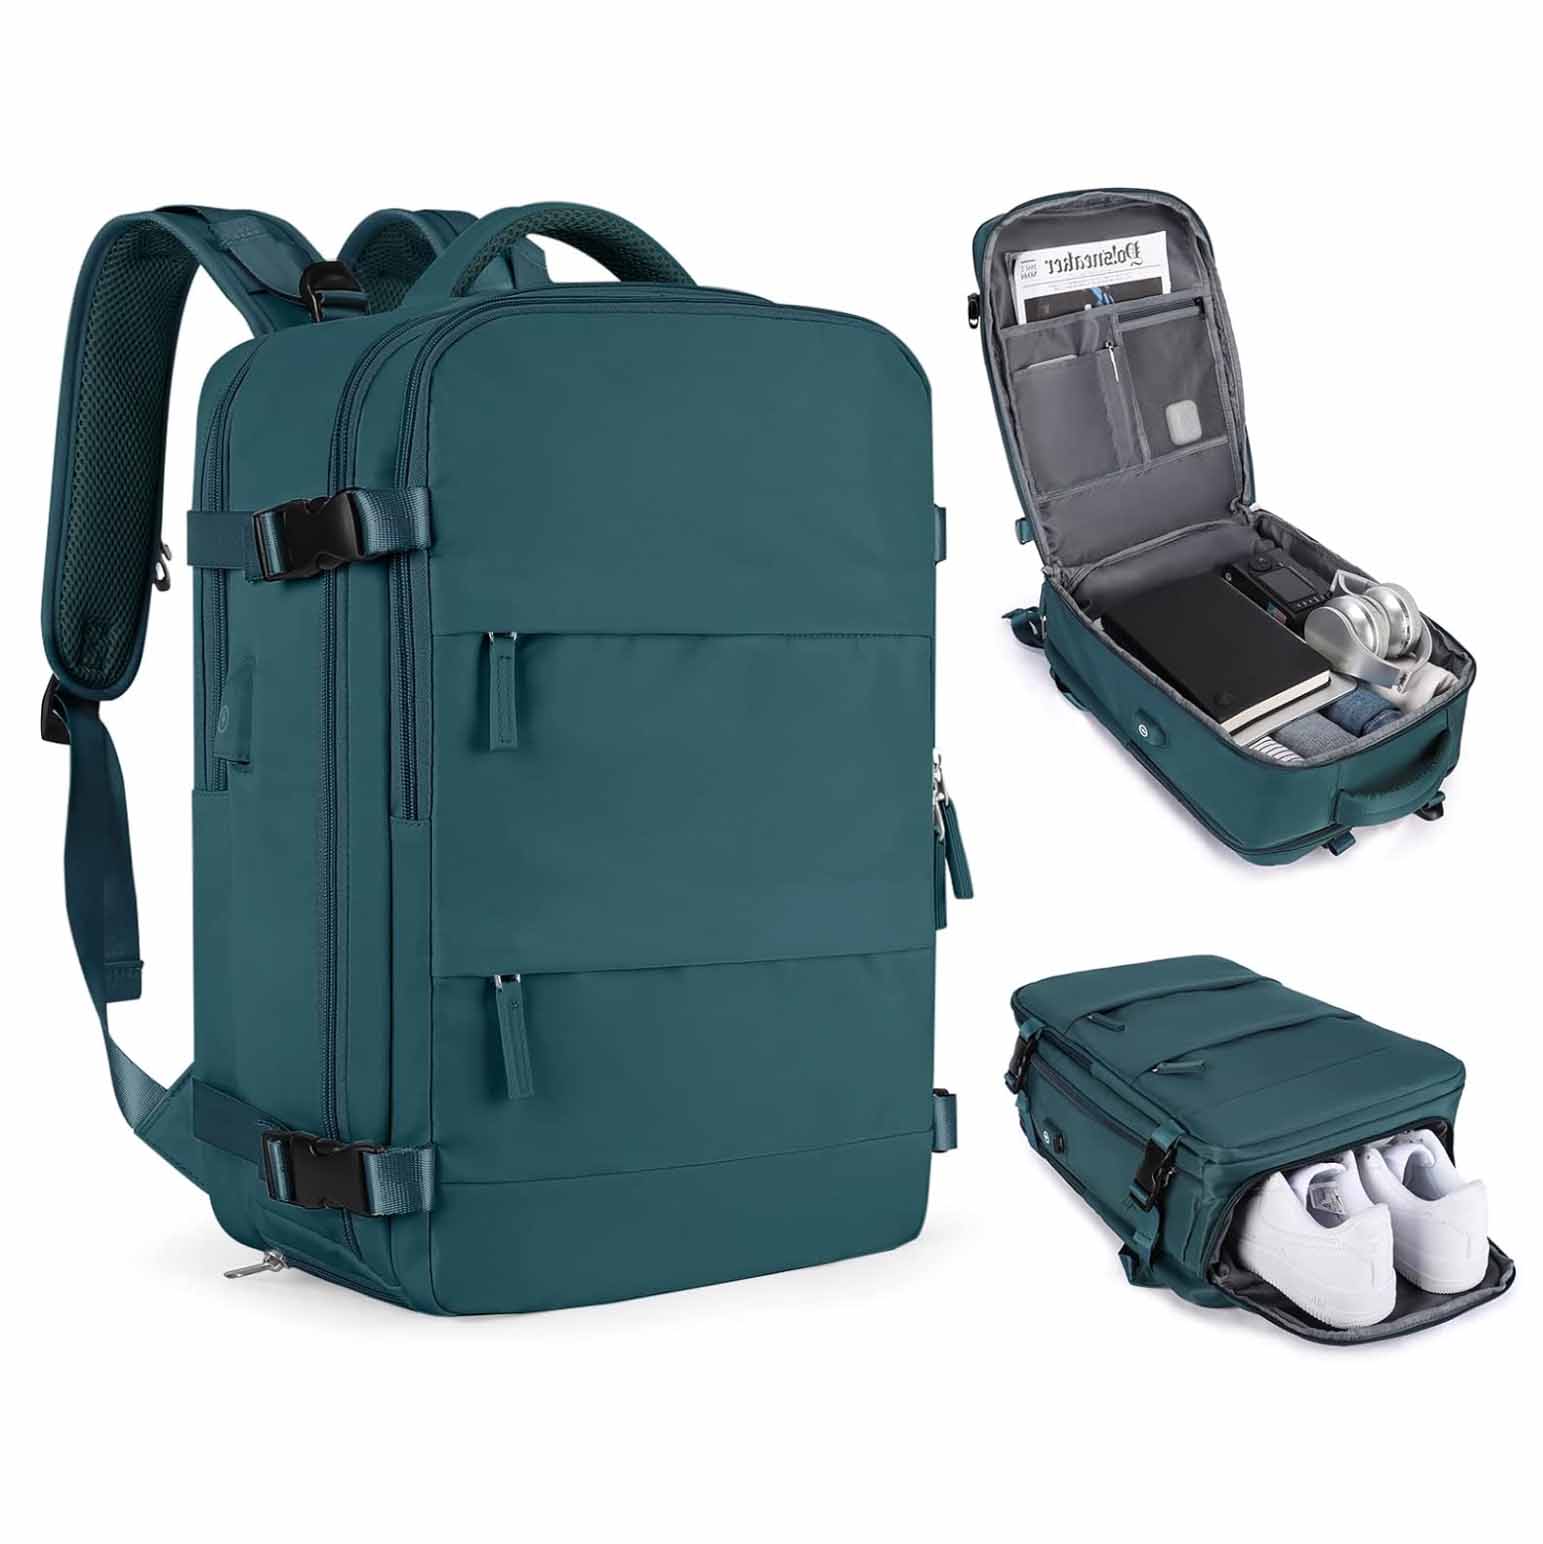 Dark green backpack showing interior compartments